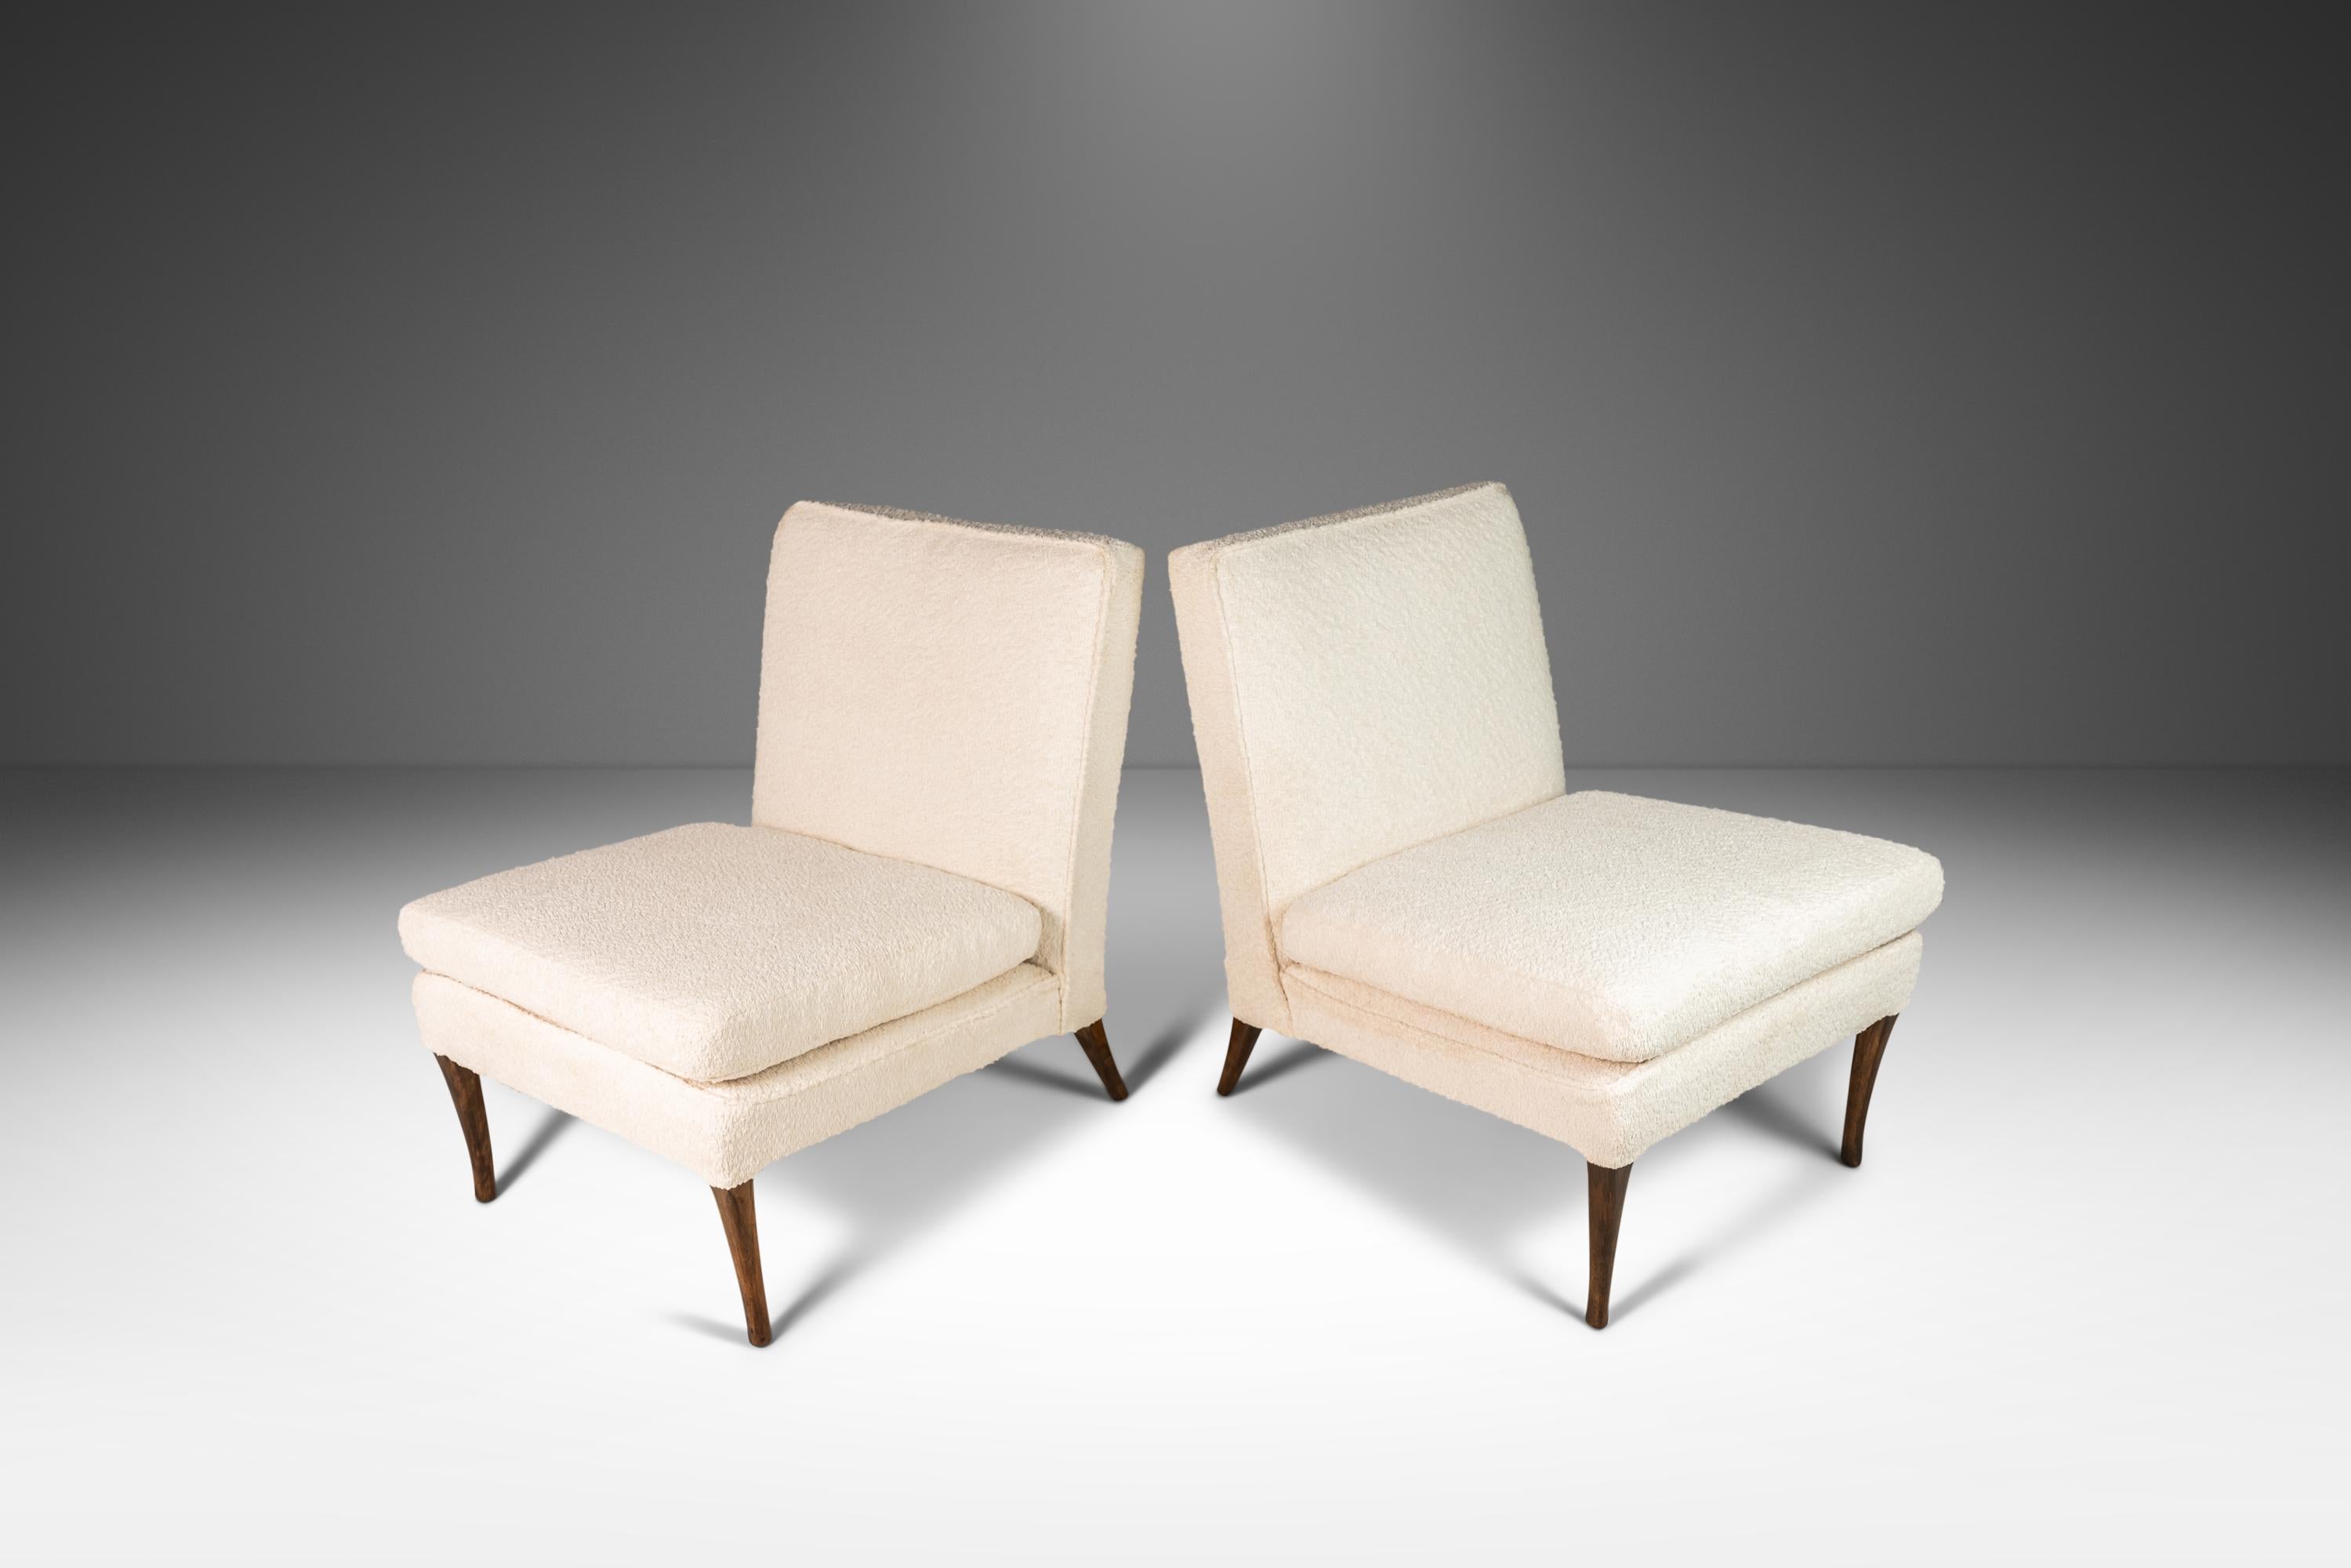 The epitome of 1950's modern design, these two armless chairs have been attributed to T. H. Robsjohn-Gibbings for Widdicomb and are newly upholstered in Knoll Fabrics White Boucle. Their iconic shape and classic lines make them instantly